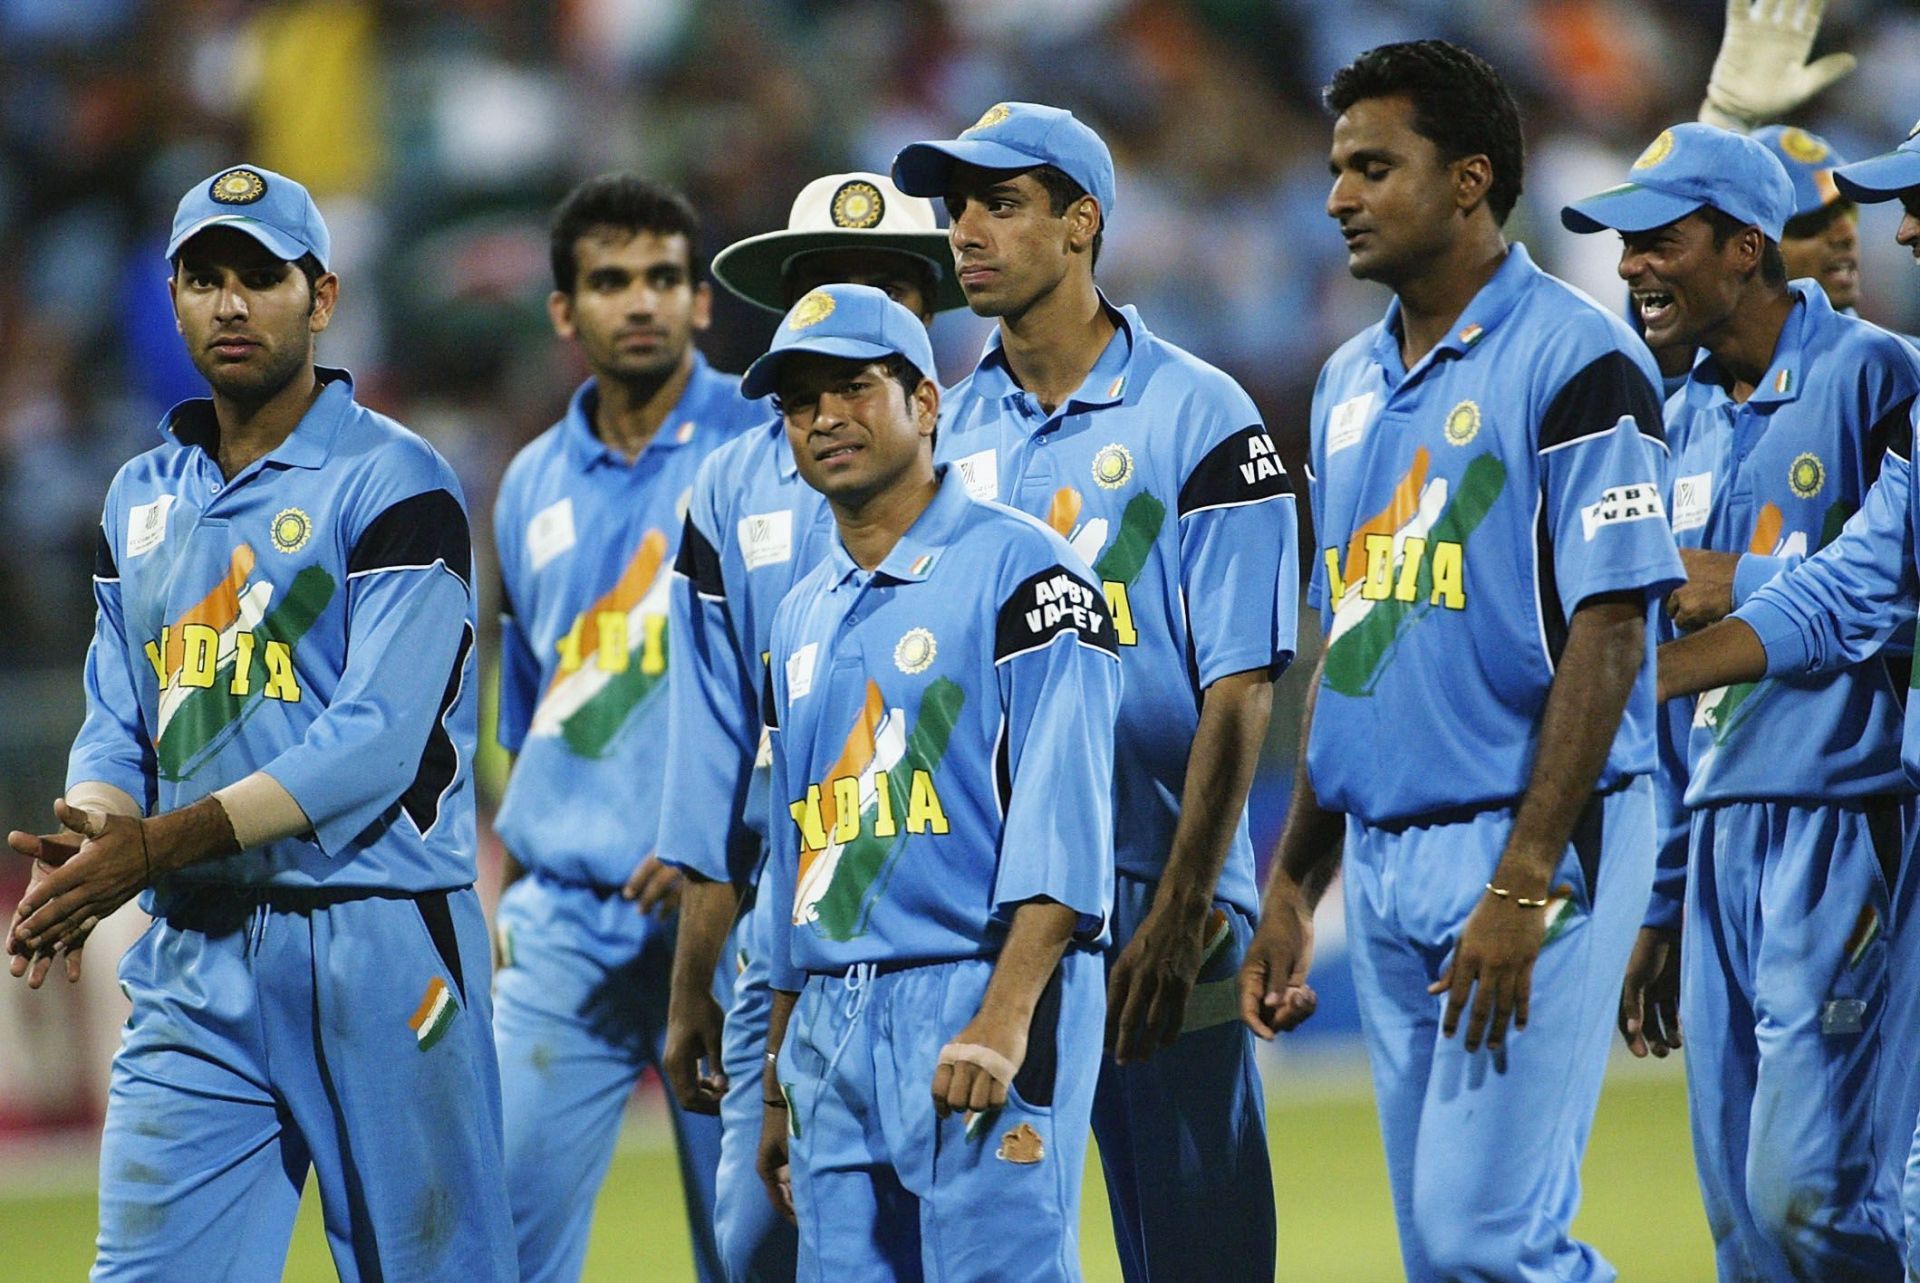 The Indian team led by Sachin Tendulkar (center) celebrate a win in the 2003 World Cup.